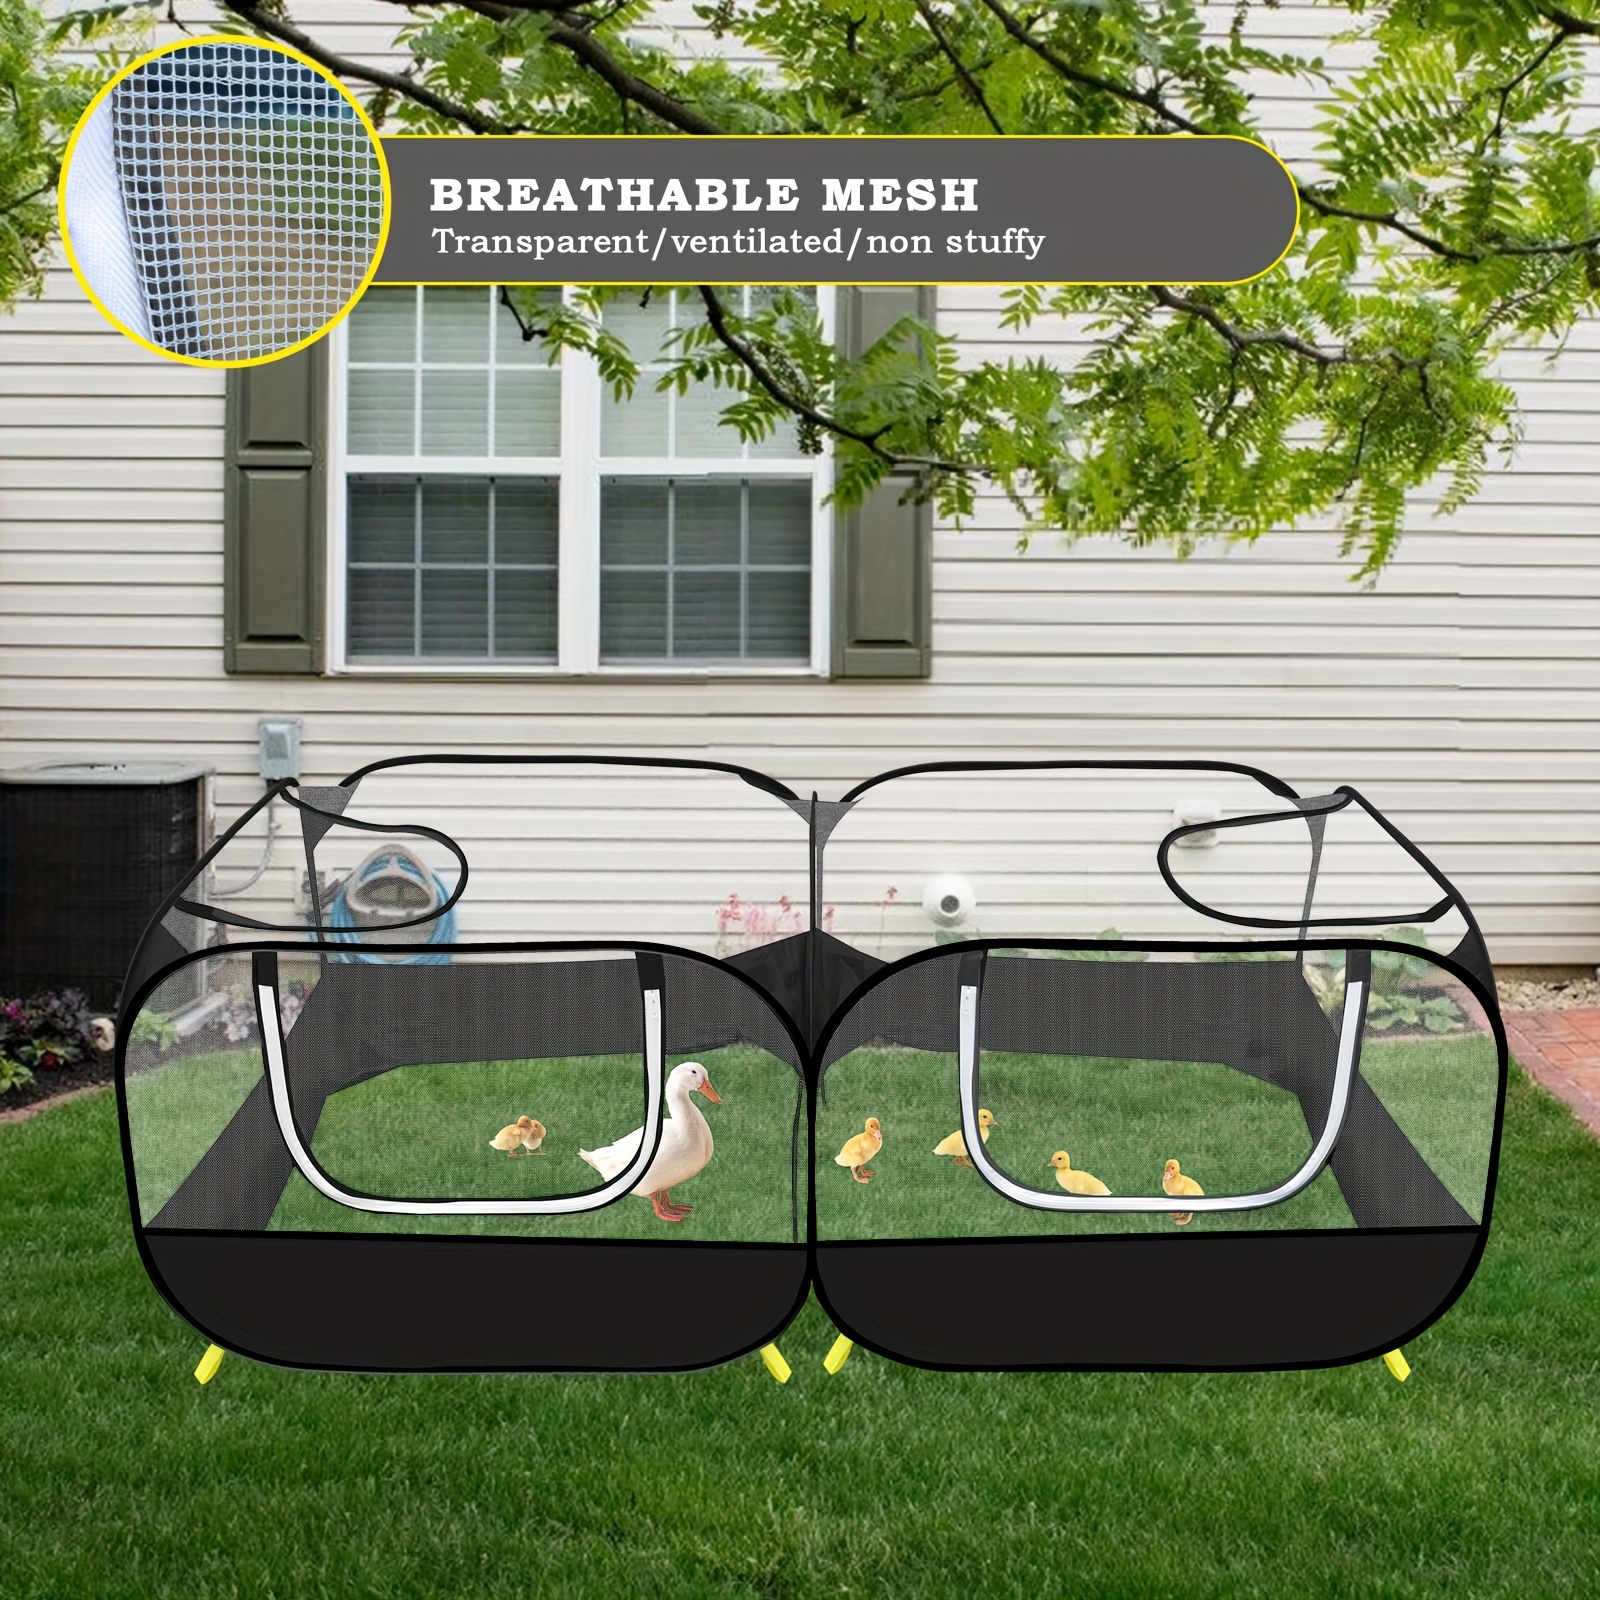 

1pc Large Chicken Fencing With No Bottom, Foldable Breathable Pet Cage Tent, Portable Outdoor Playpen With Transparent Mesh, Sturdy Zipper Design, Good Air Circulation